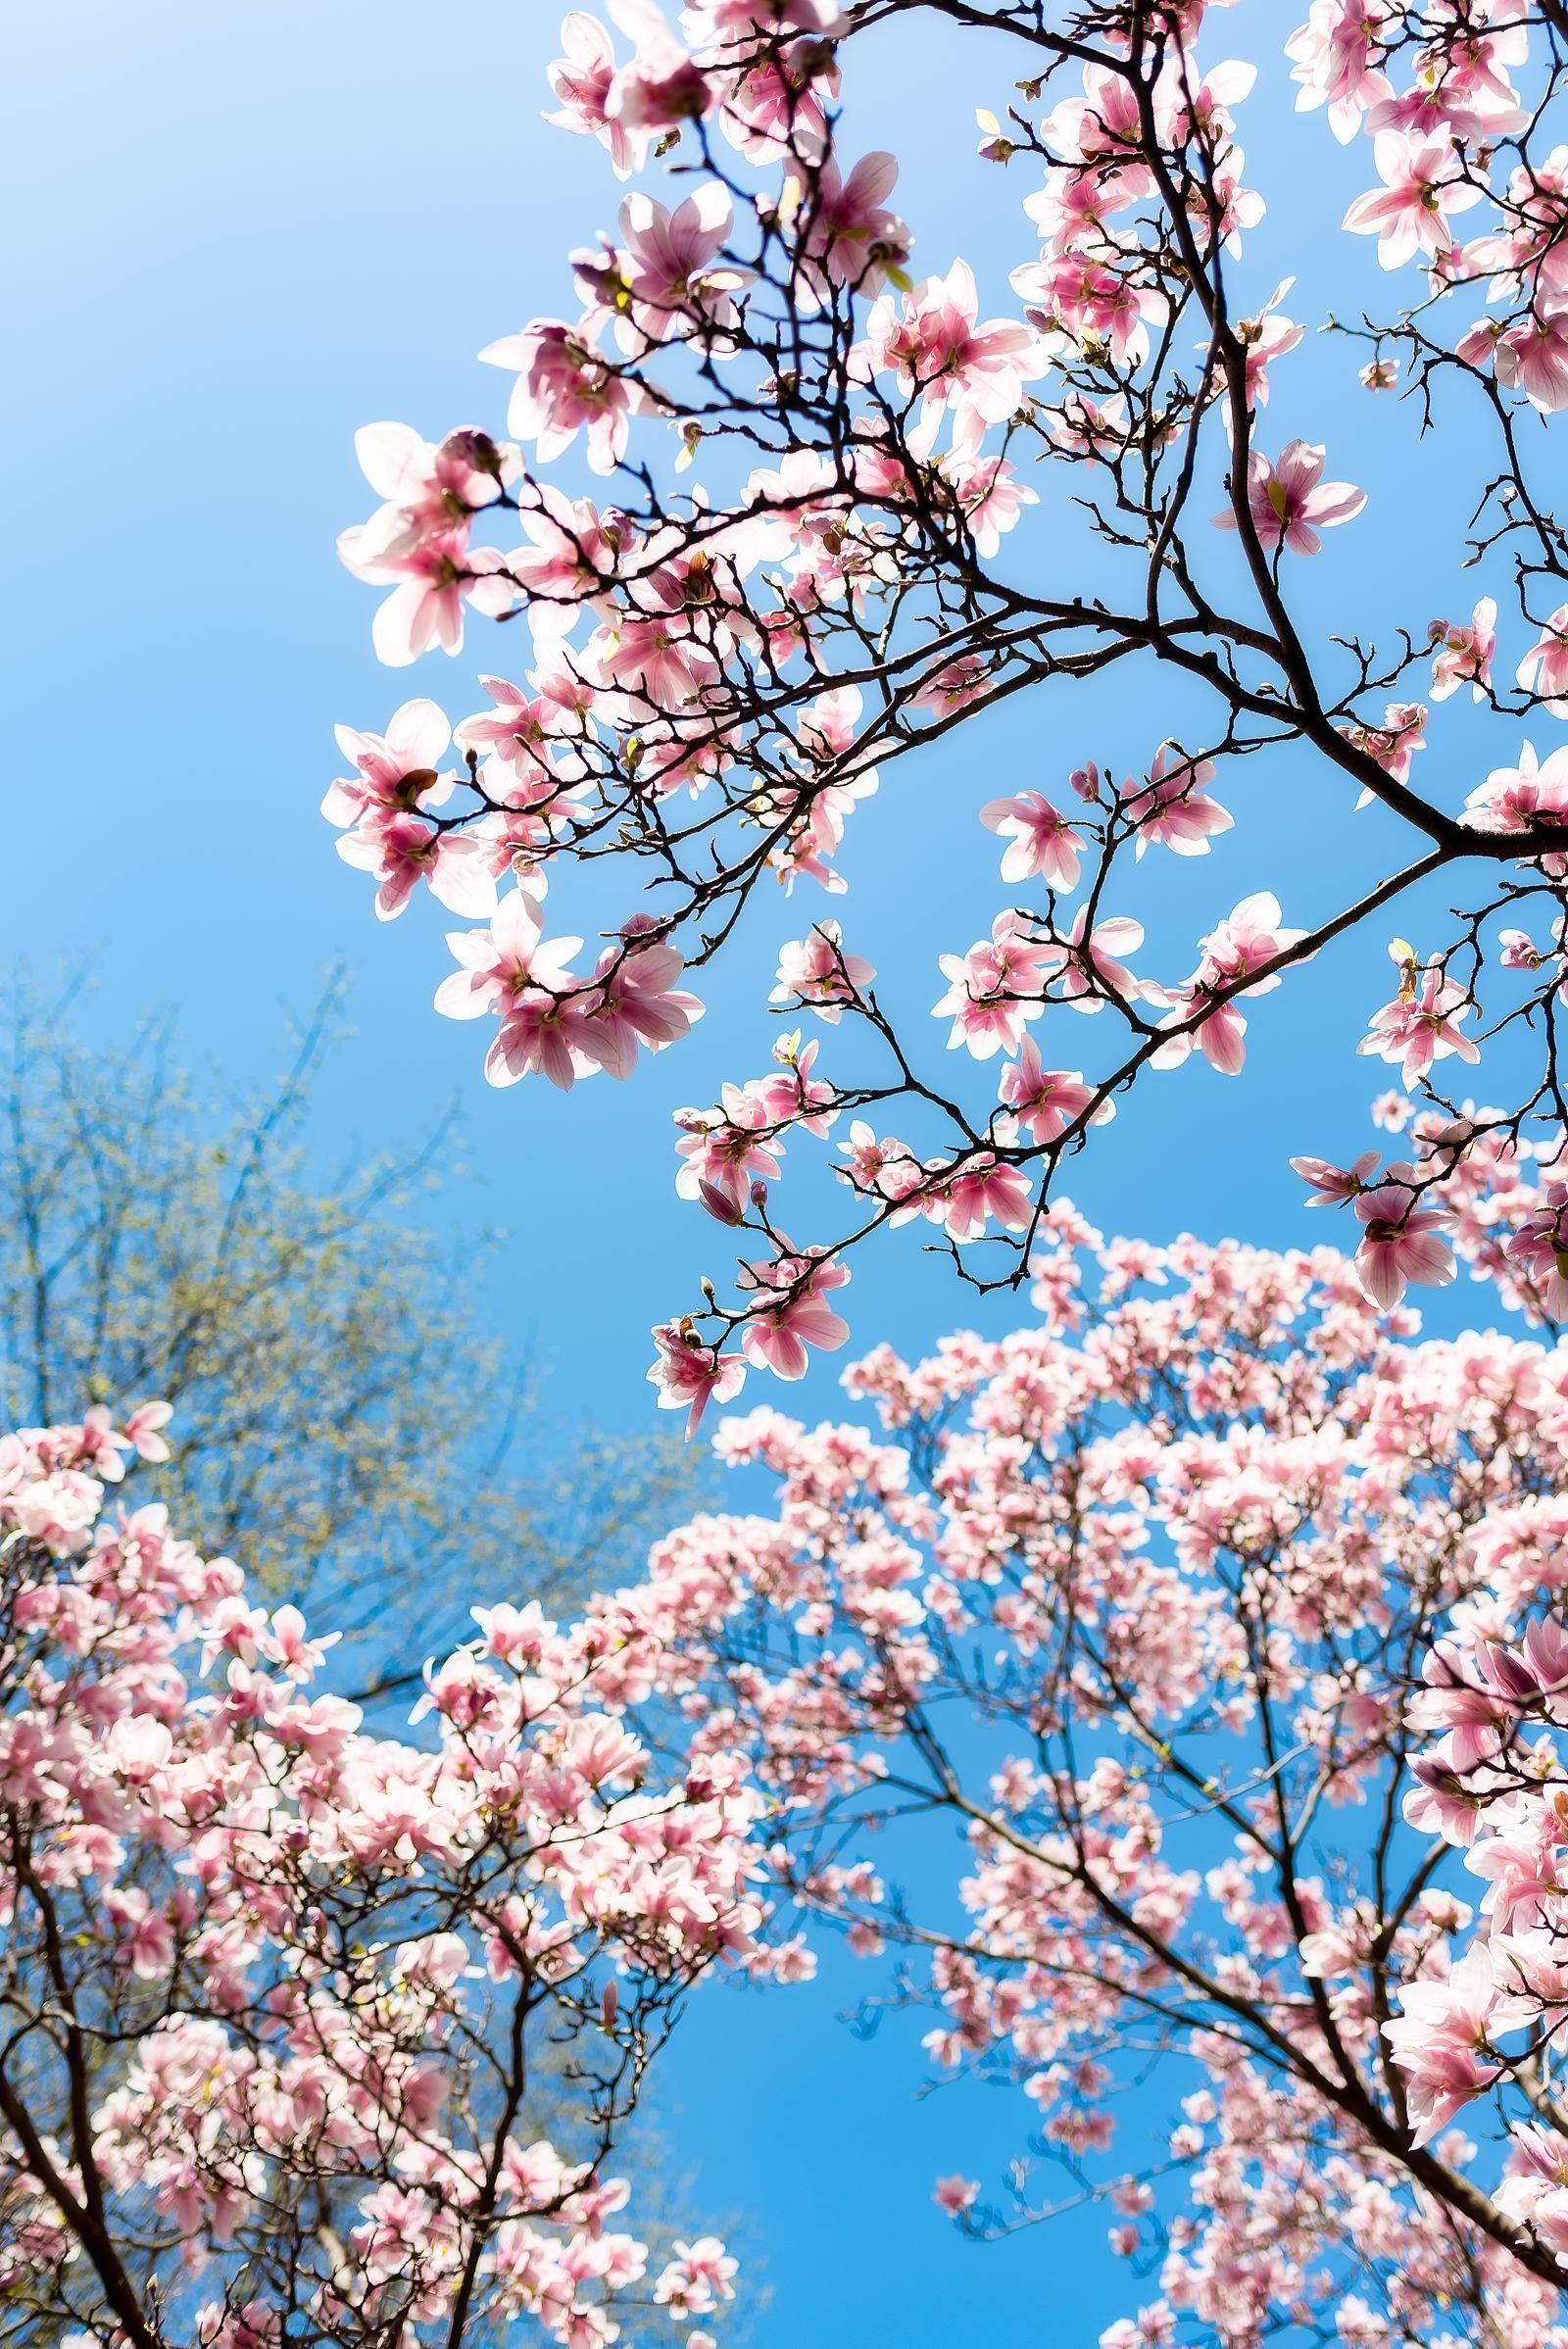 Aesthetic Cherry Blossoms Wallpapers - Top Free Aesthetic ...